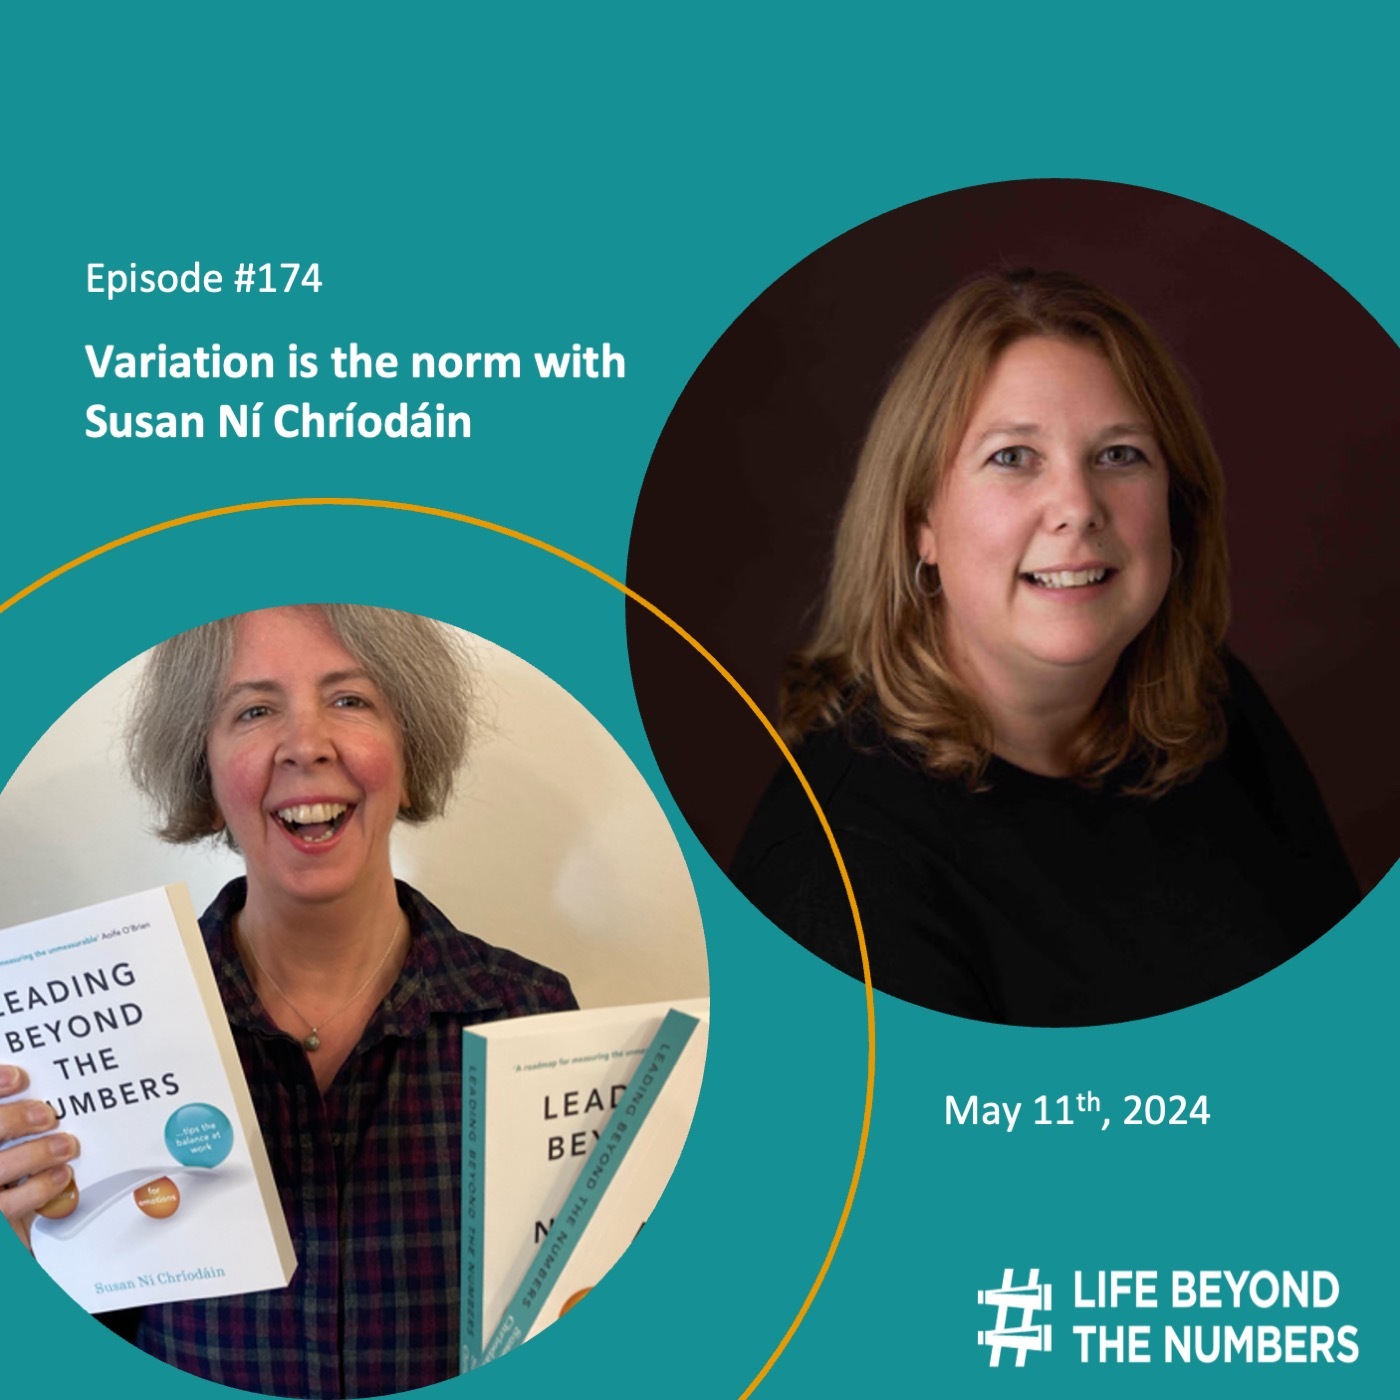 #174 Variation is the norm - Susan Ni Chriodain